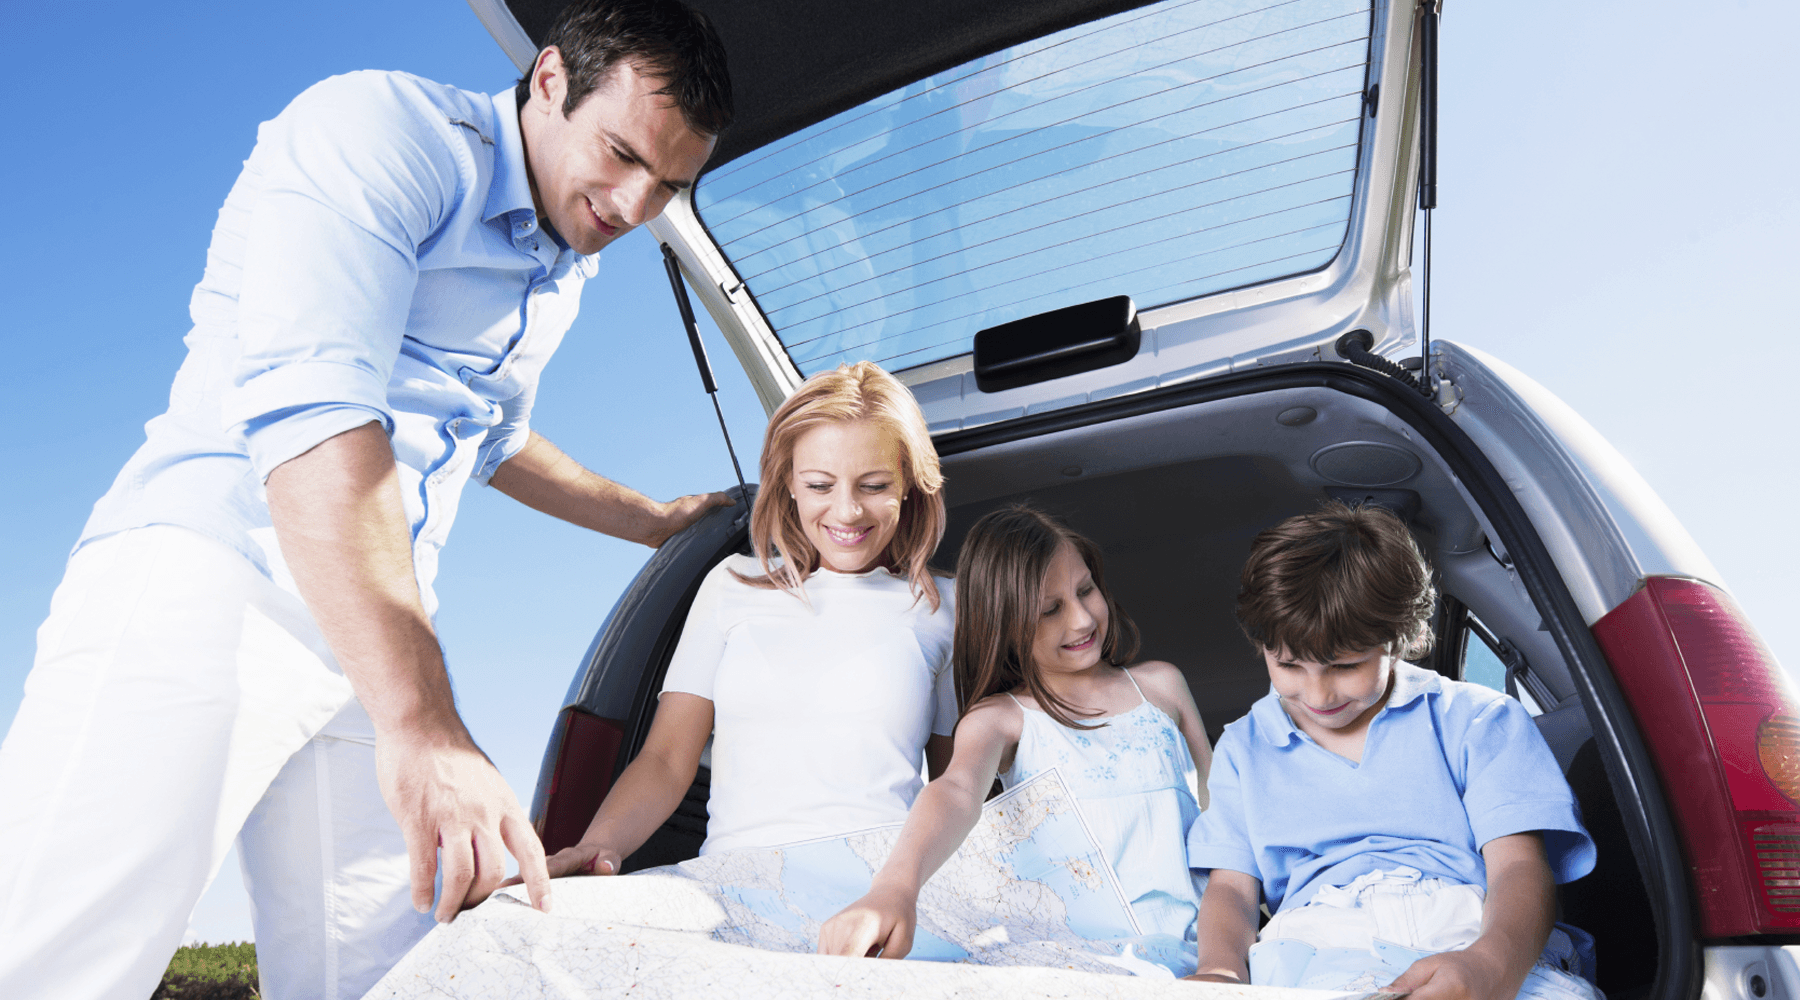 Handy Tricks for Parents To Make Family Summer Trips Less Messy